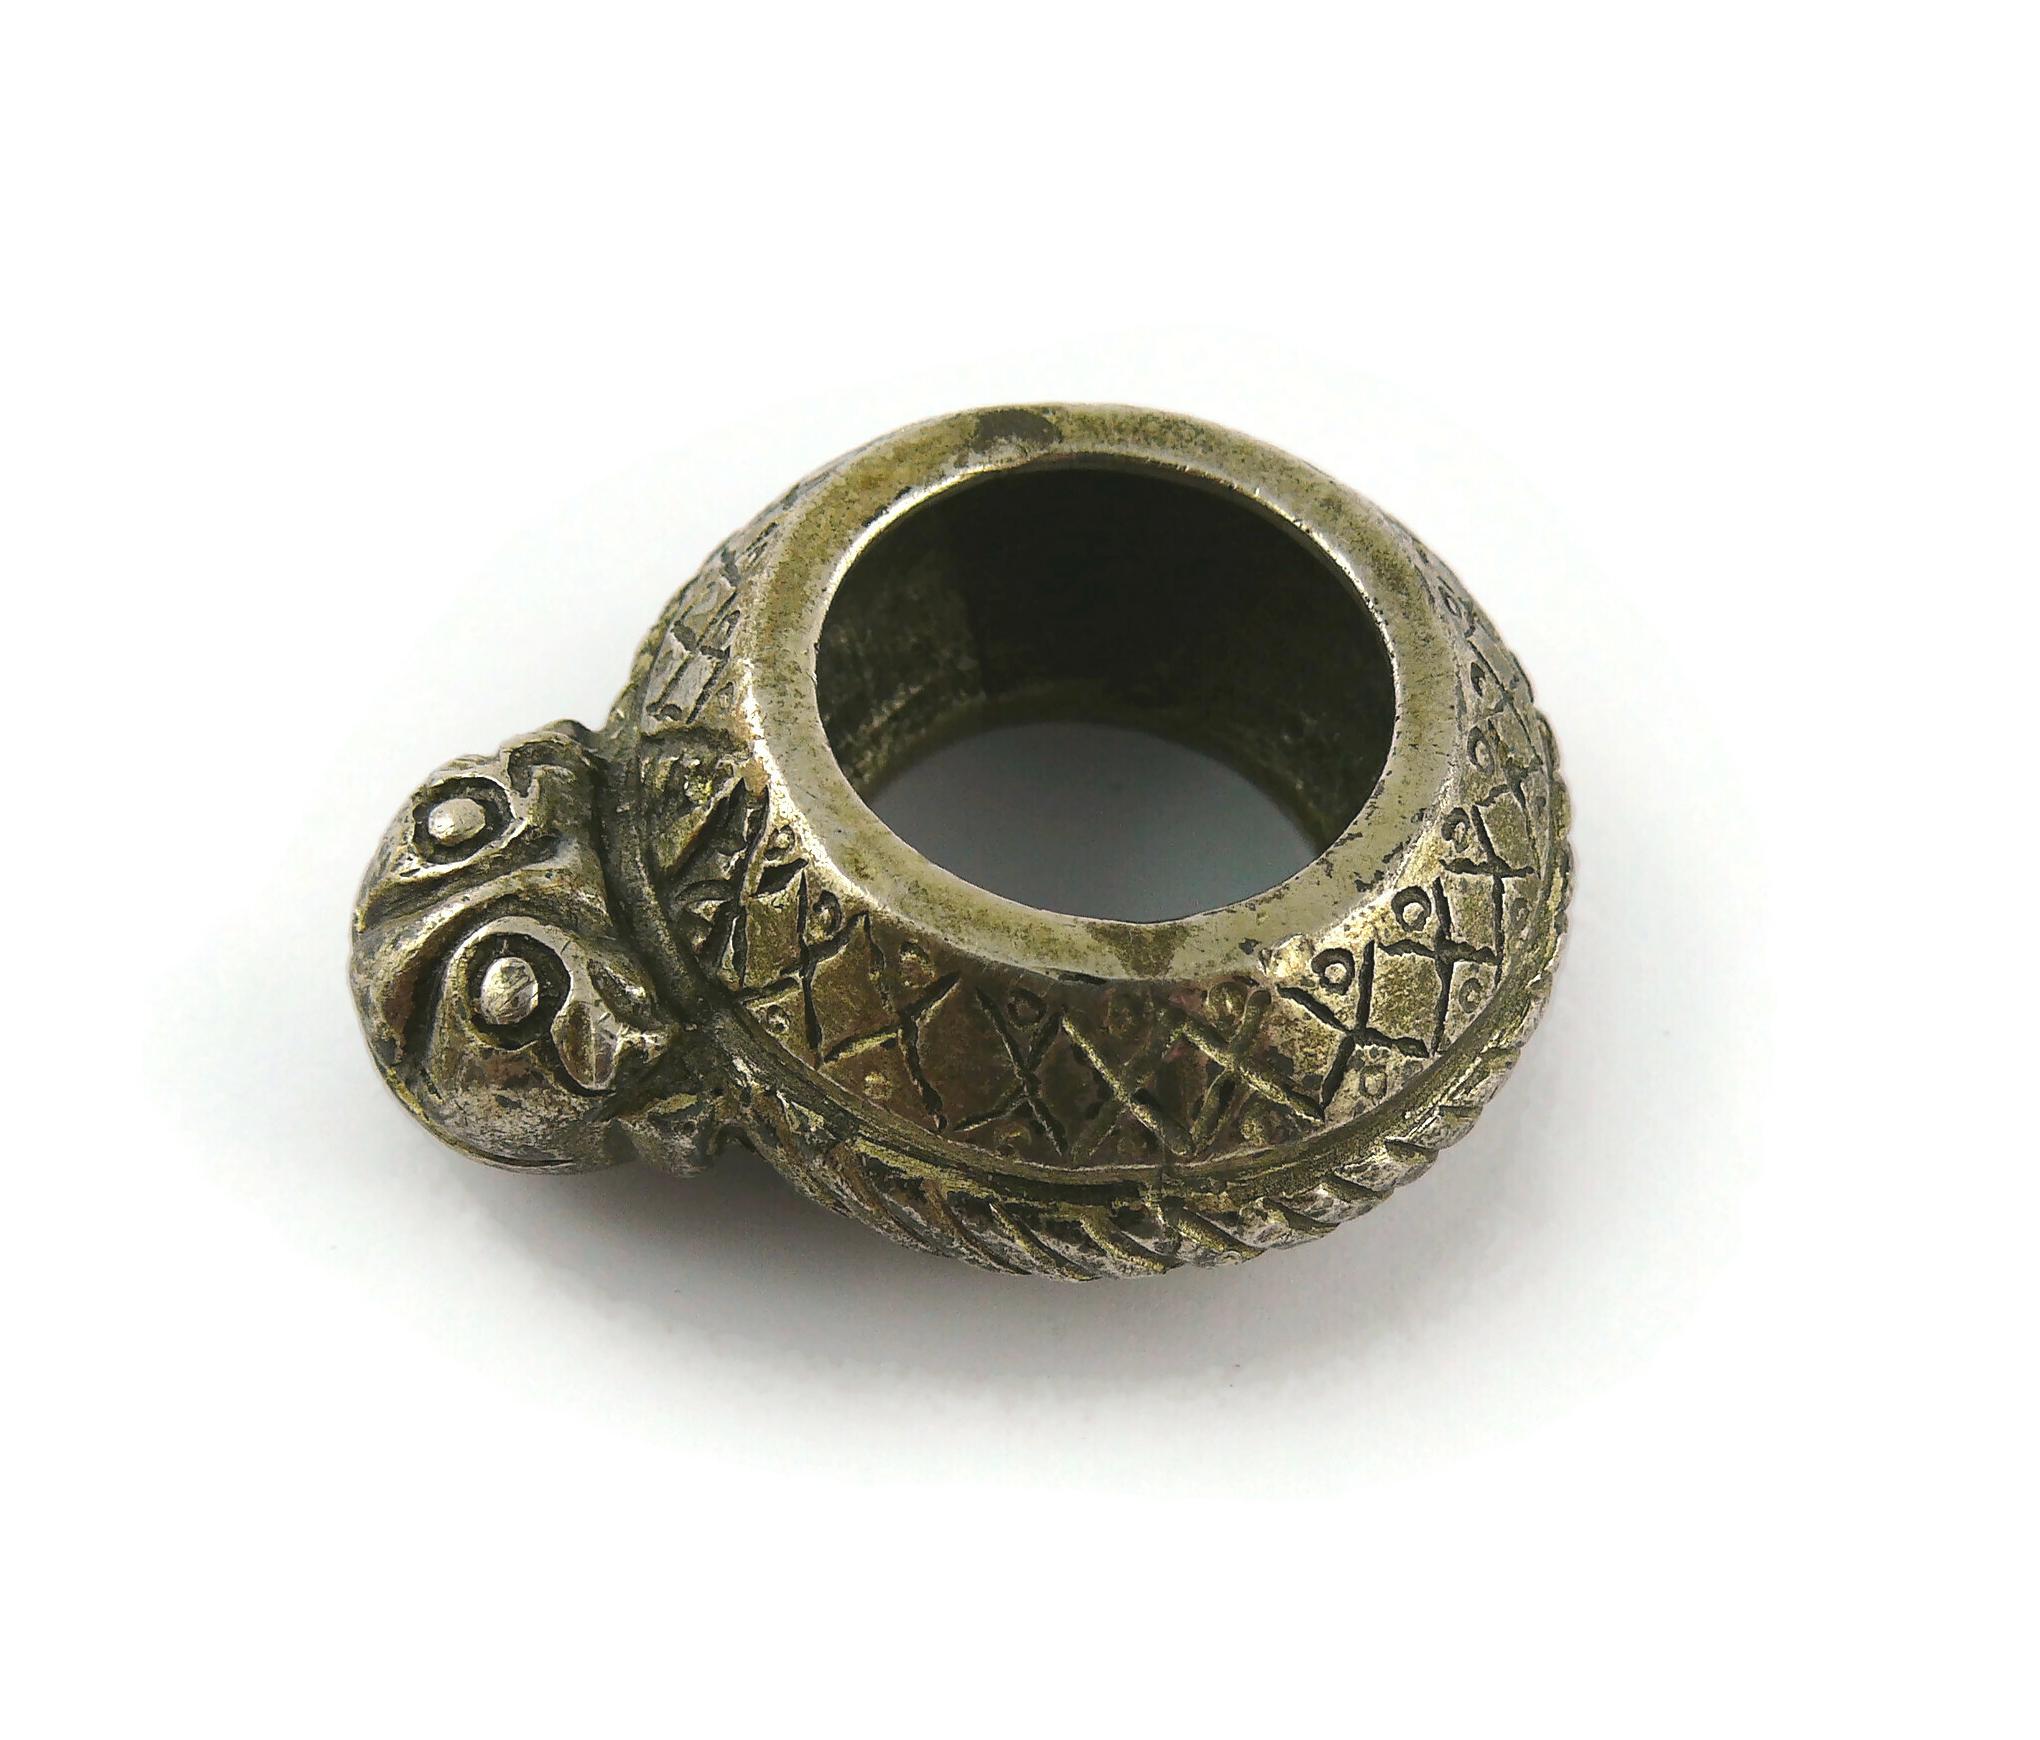 JEAN PAUL GAULTIER vintage antiqued silver toned massive ring featuring an African ethnic design.

Silver tone metal hardware.
Antiqued patina.

The oxidized/distressed patina and brutalist design is from original manufacturing.

Marked